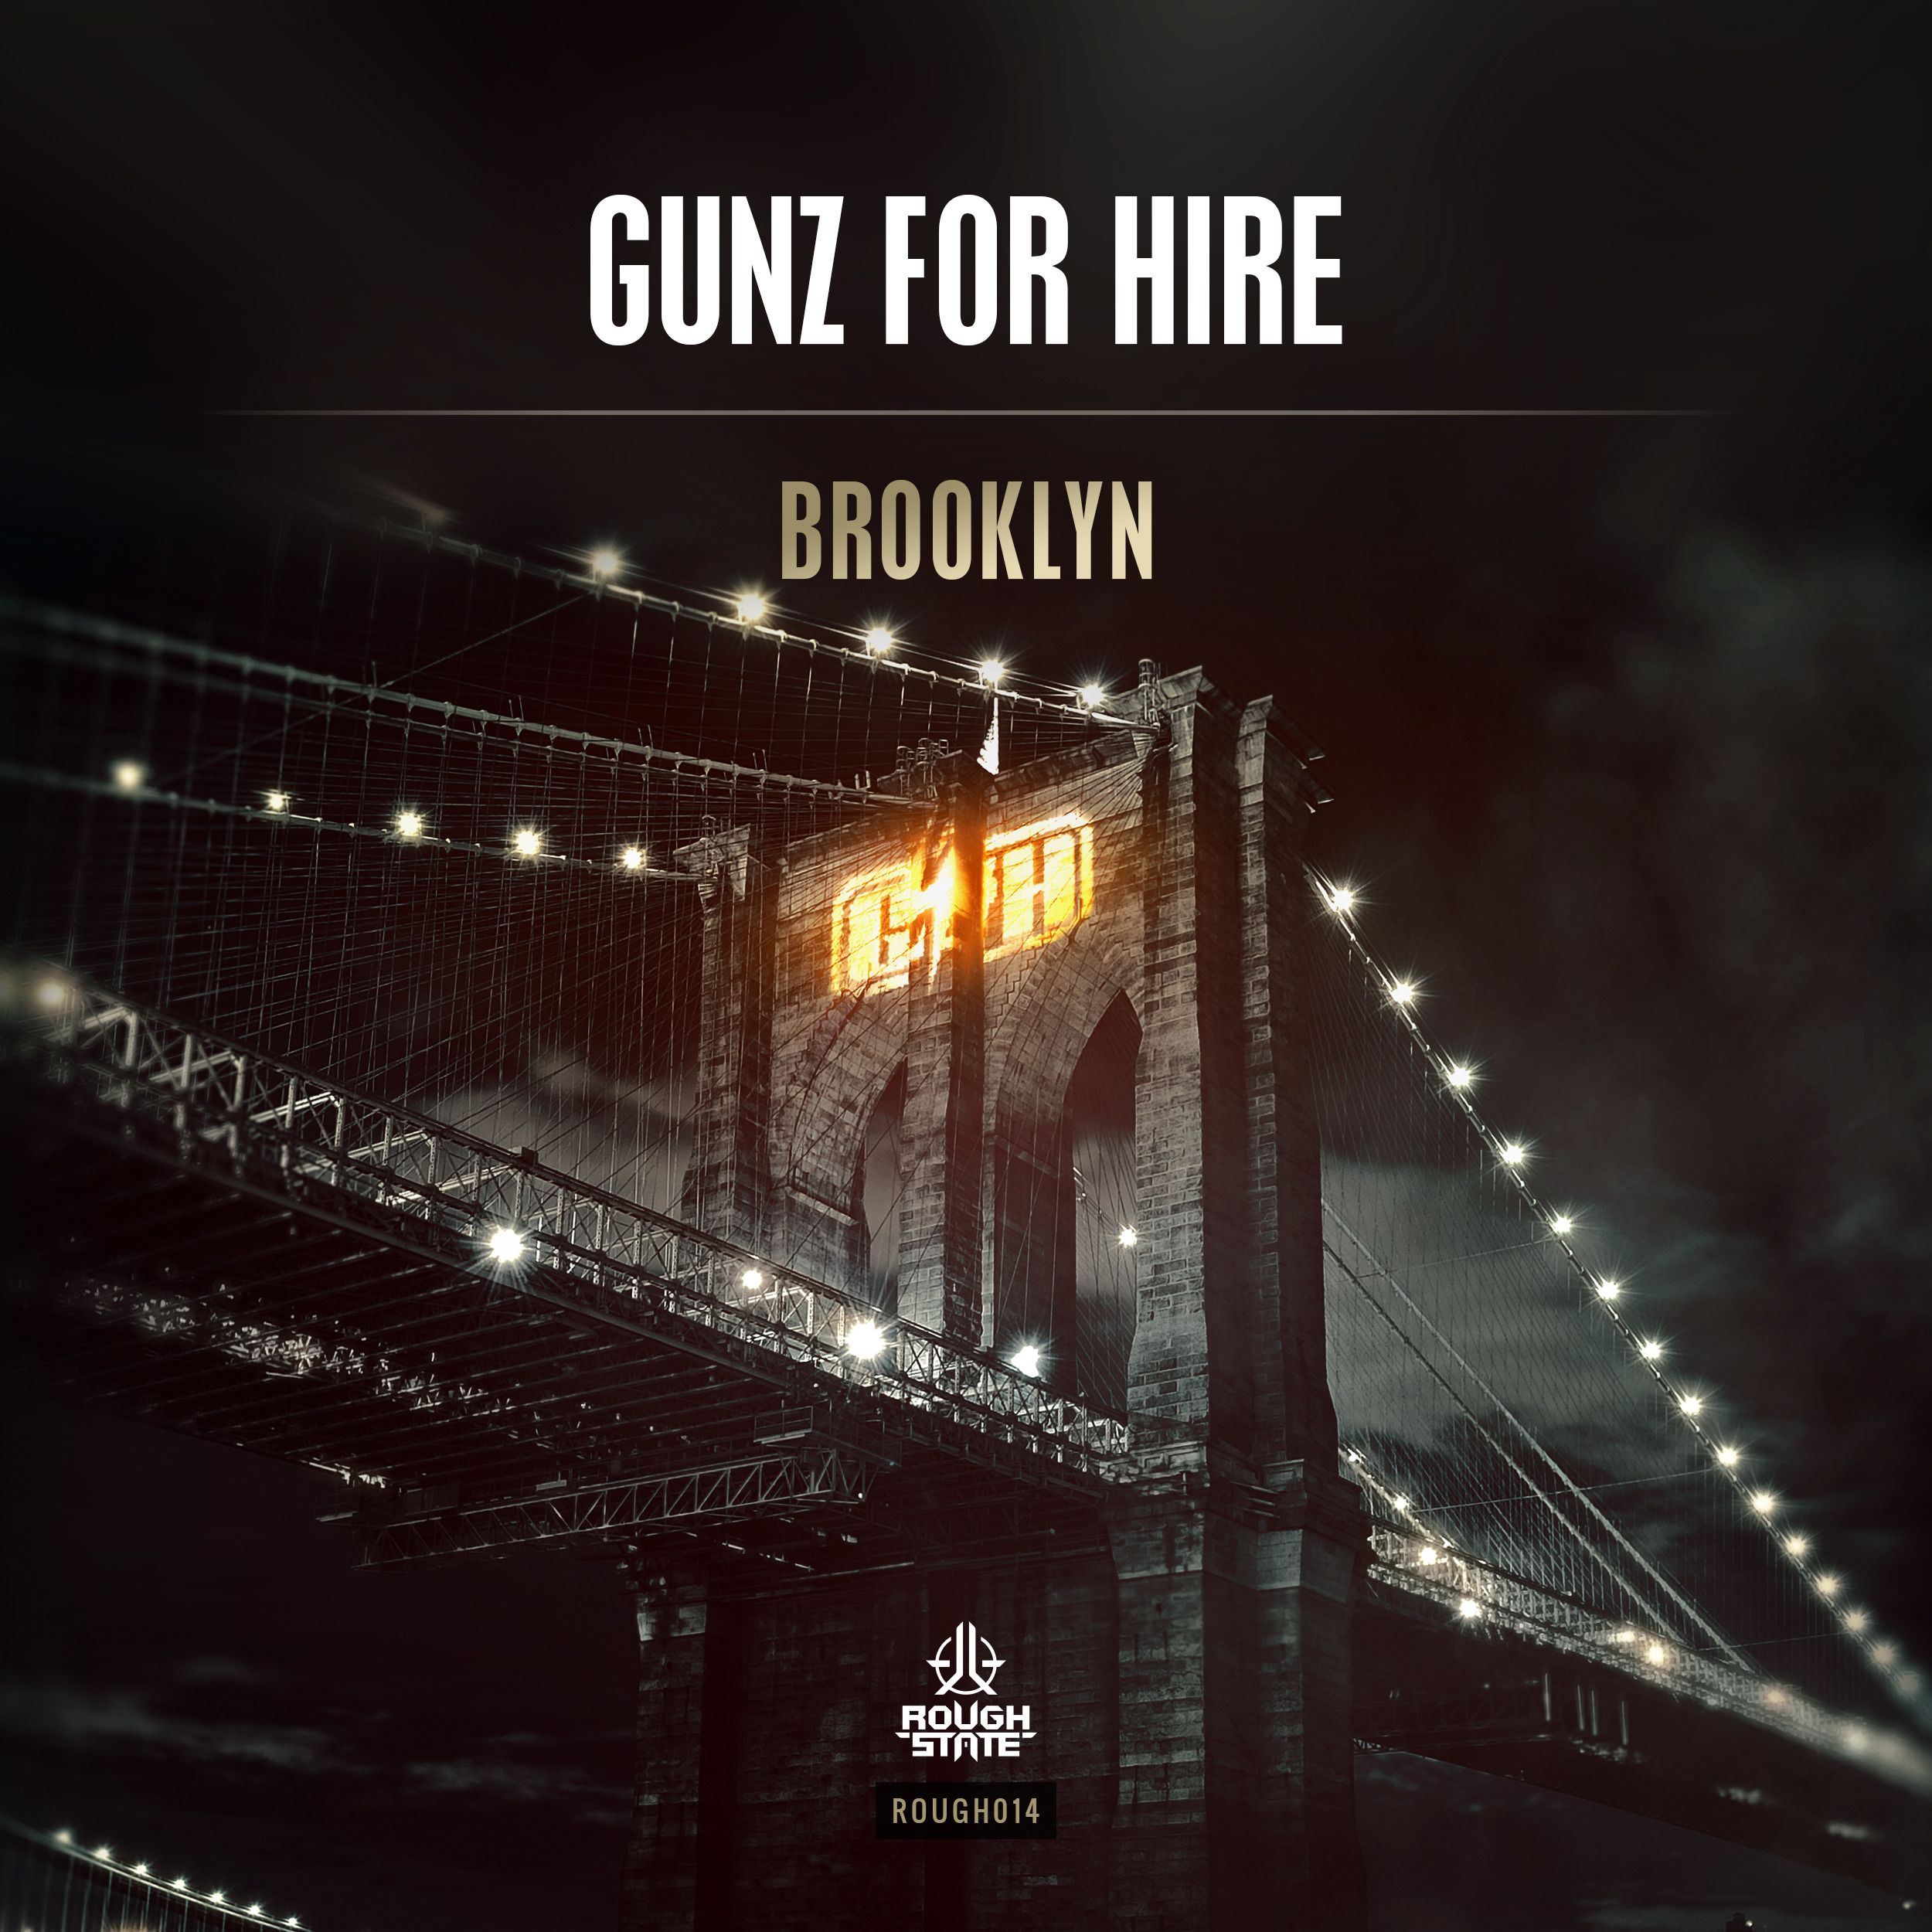 Gunz For Hire - Brooklyn [ROUGHSTATE] ROUGH014